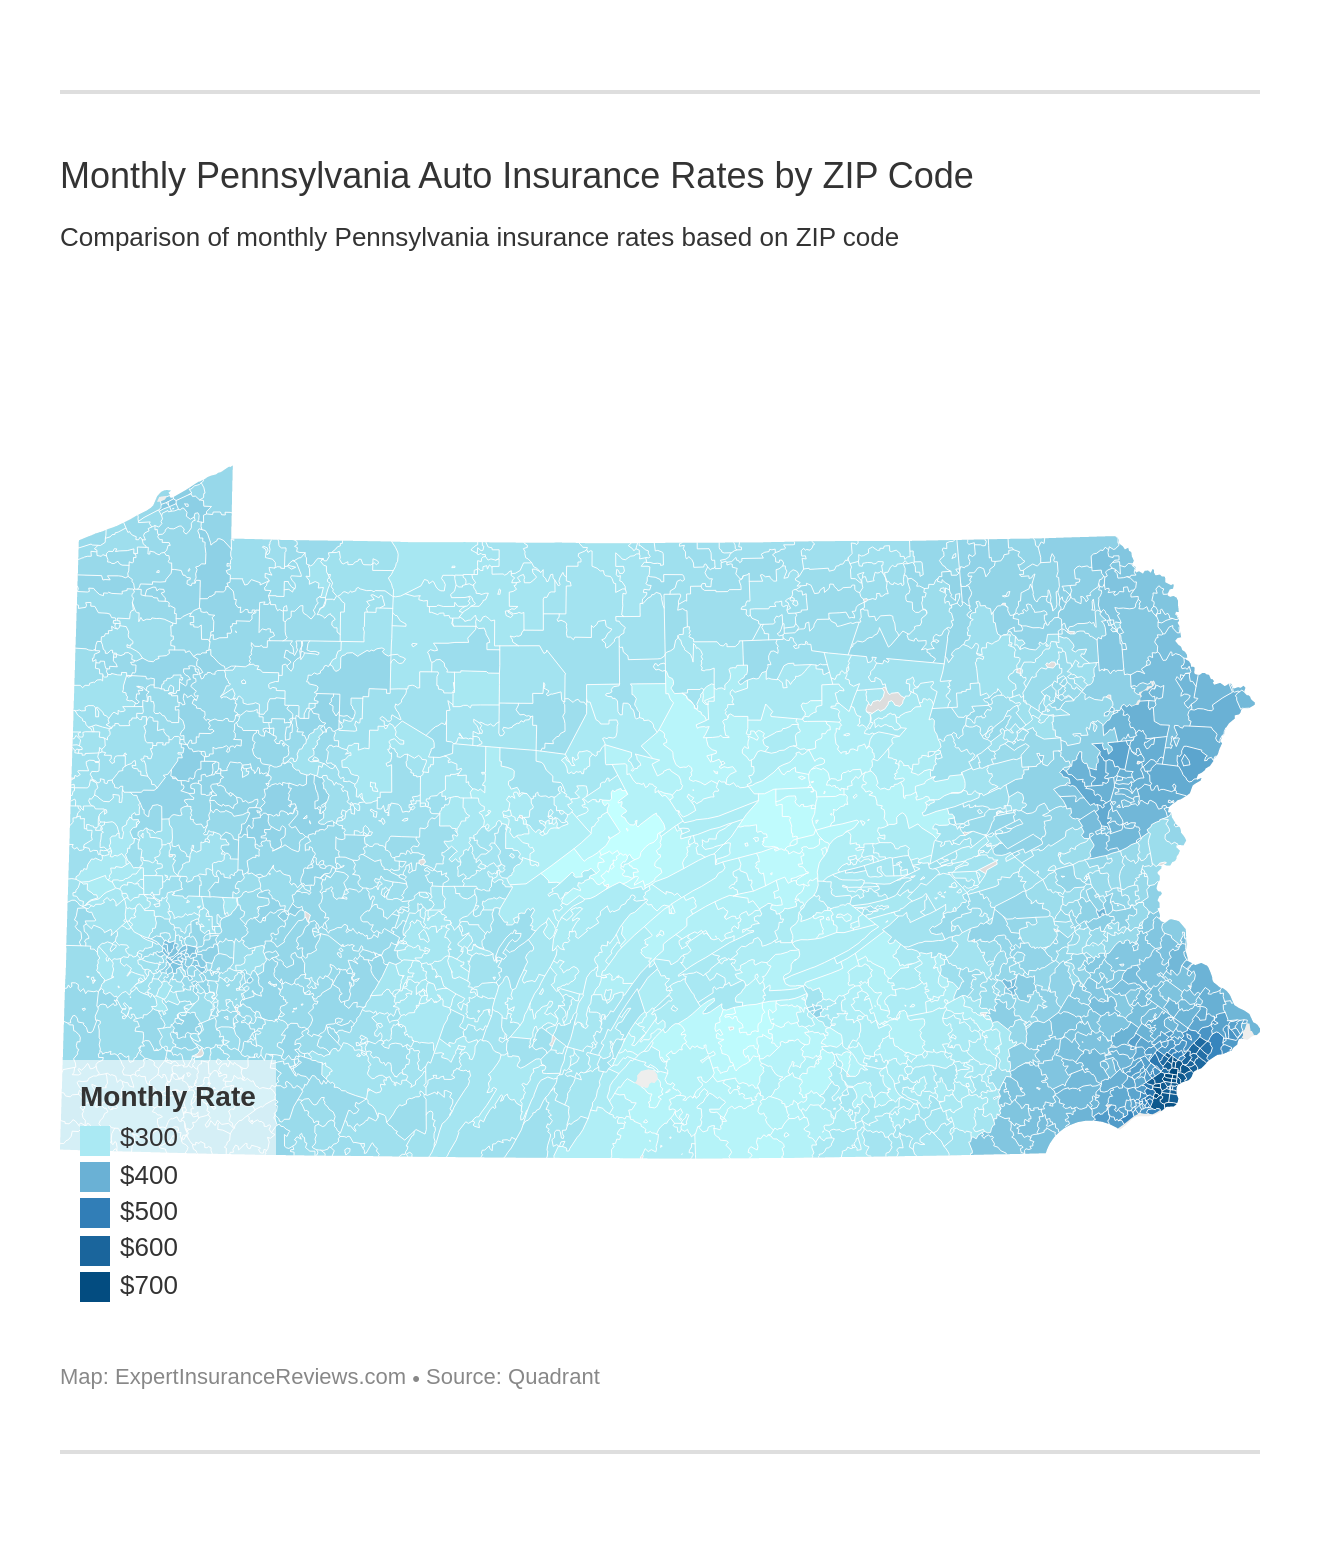 Monthly Pennsylvania Auto Insurance Rates by ZIP Code